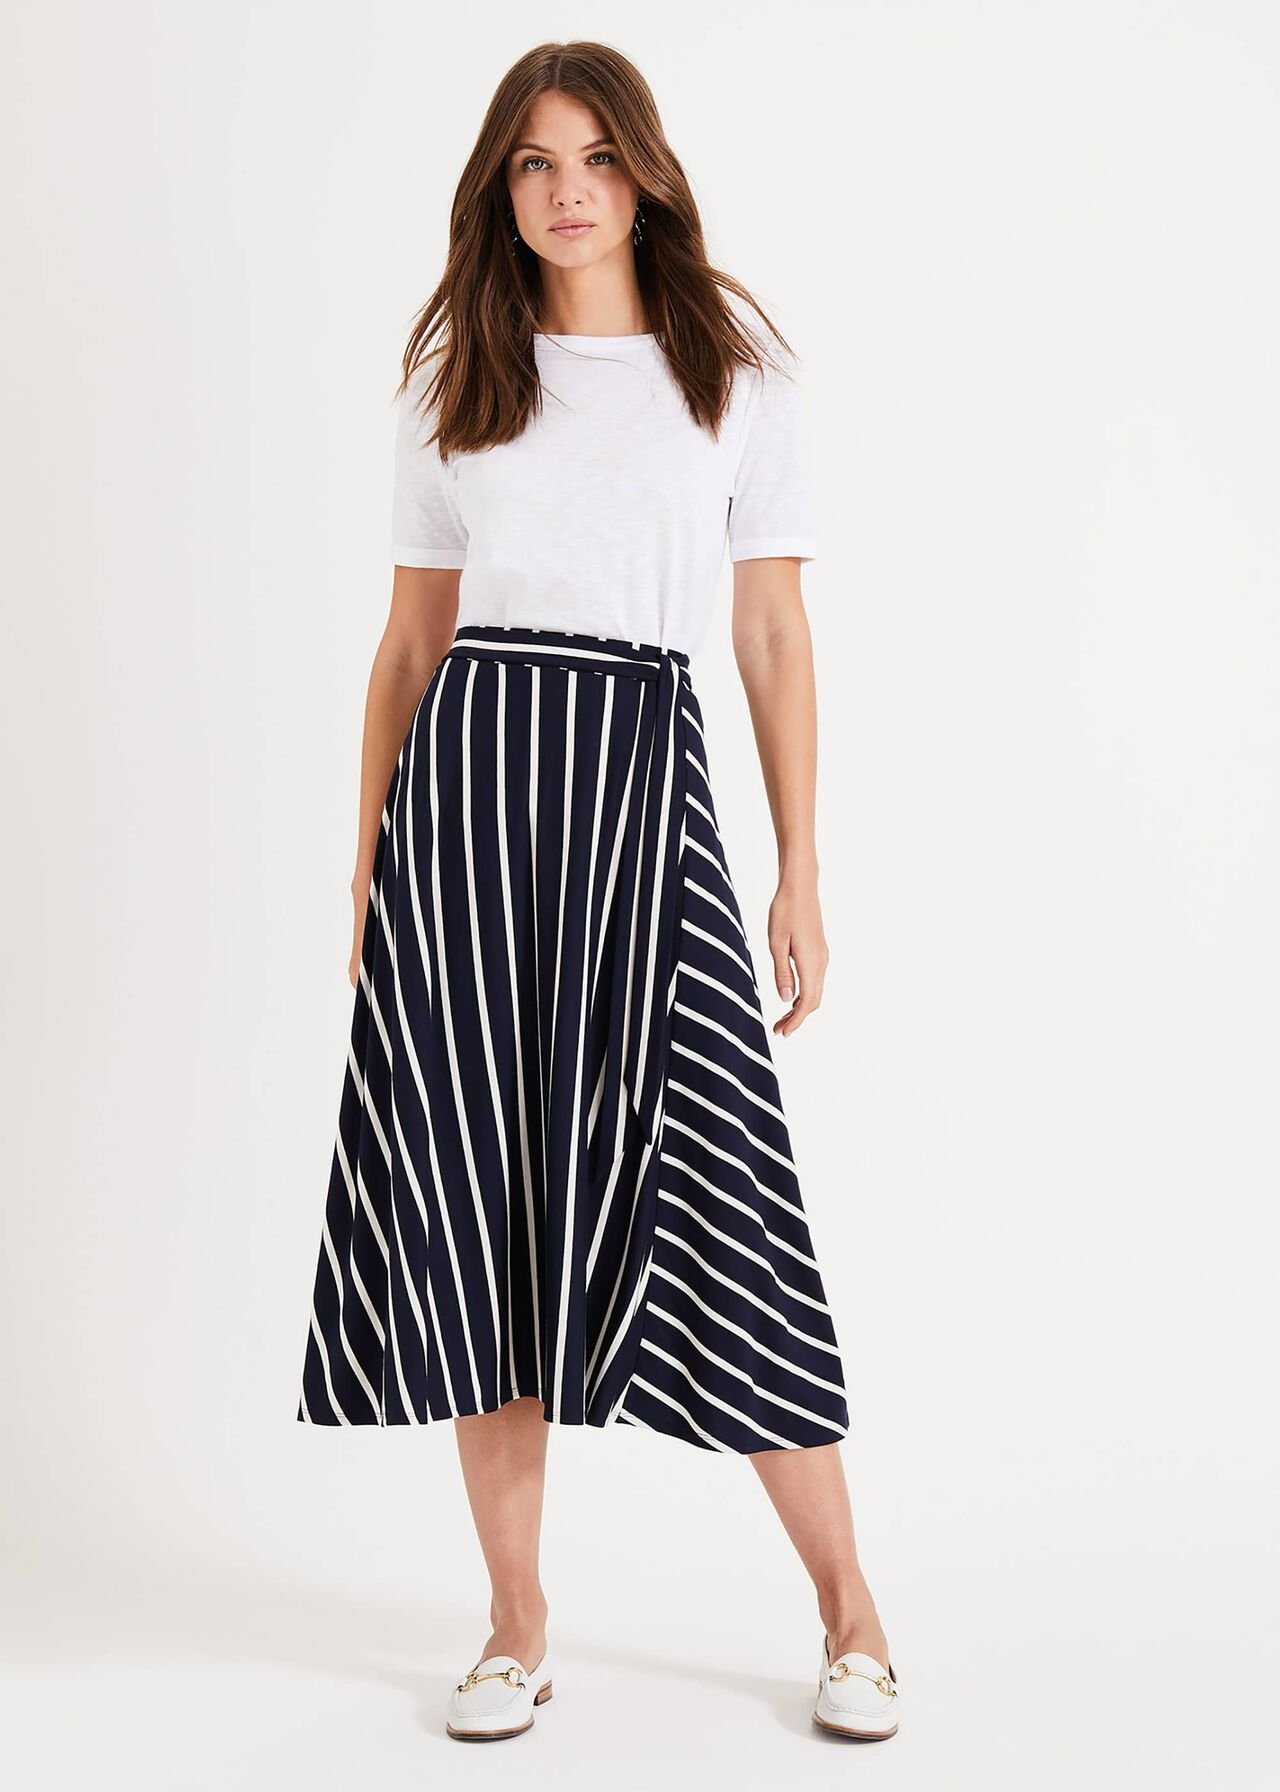 Phase eight skirts sale